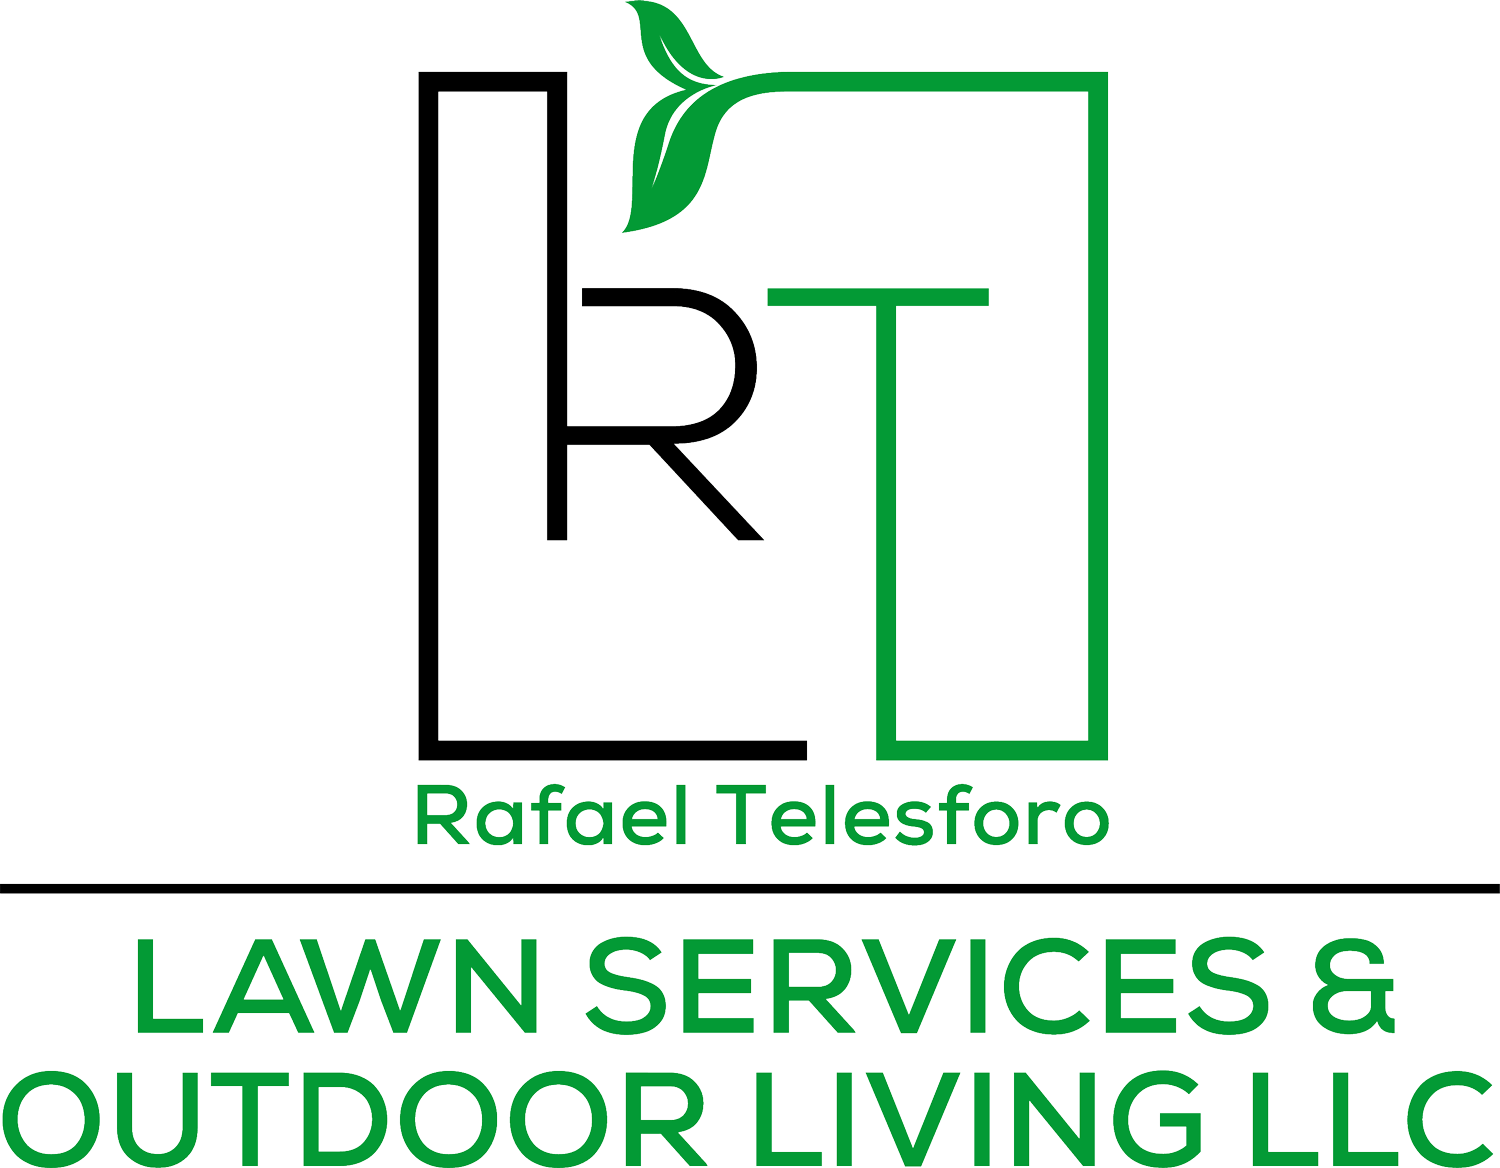 RT Lawn Services & Outdoor Living